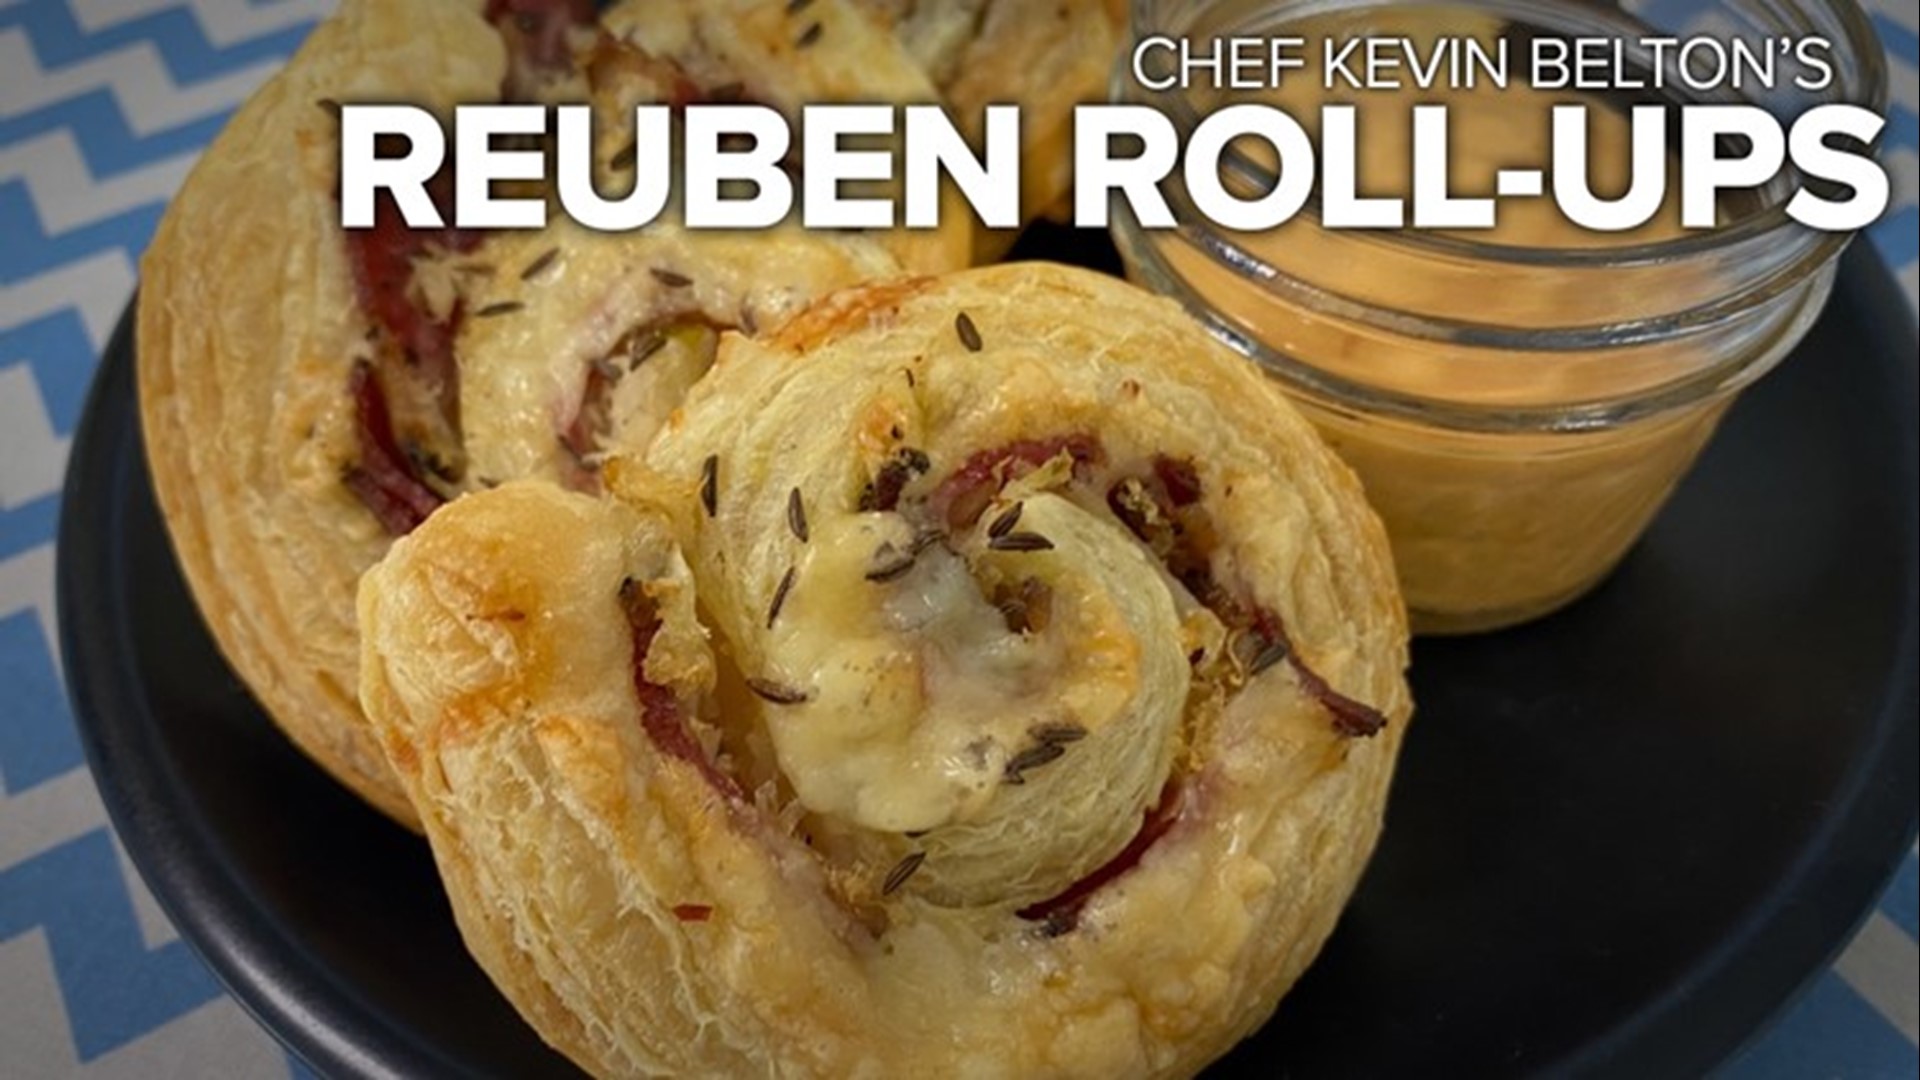 These mini takes on a reuben sandwich make the perfect snack for entertaining, watching a movie or any time!